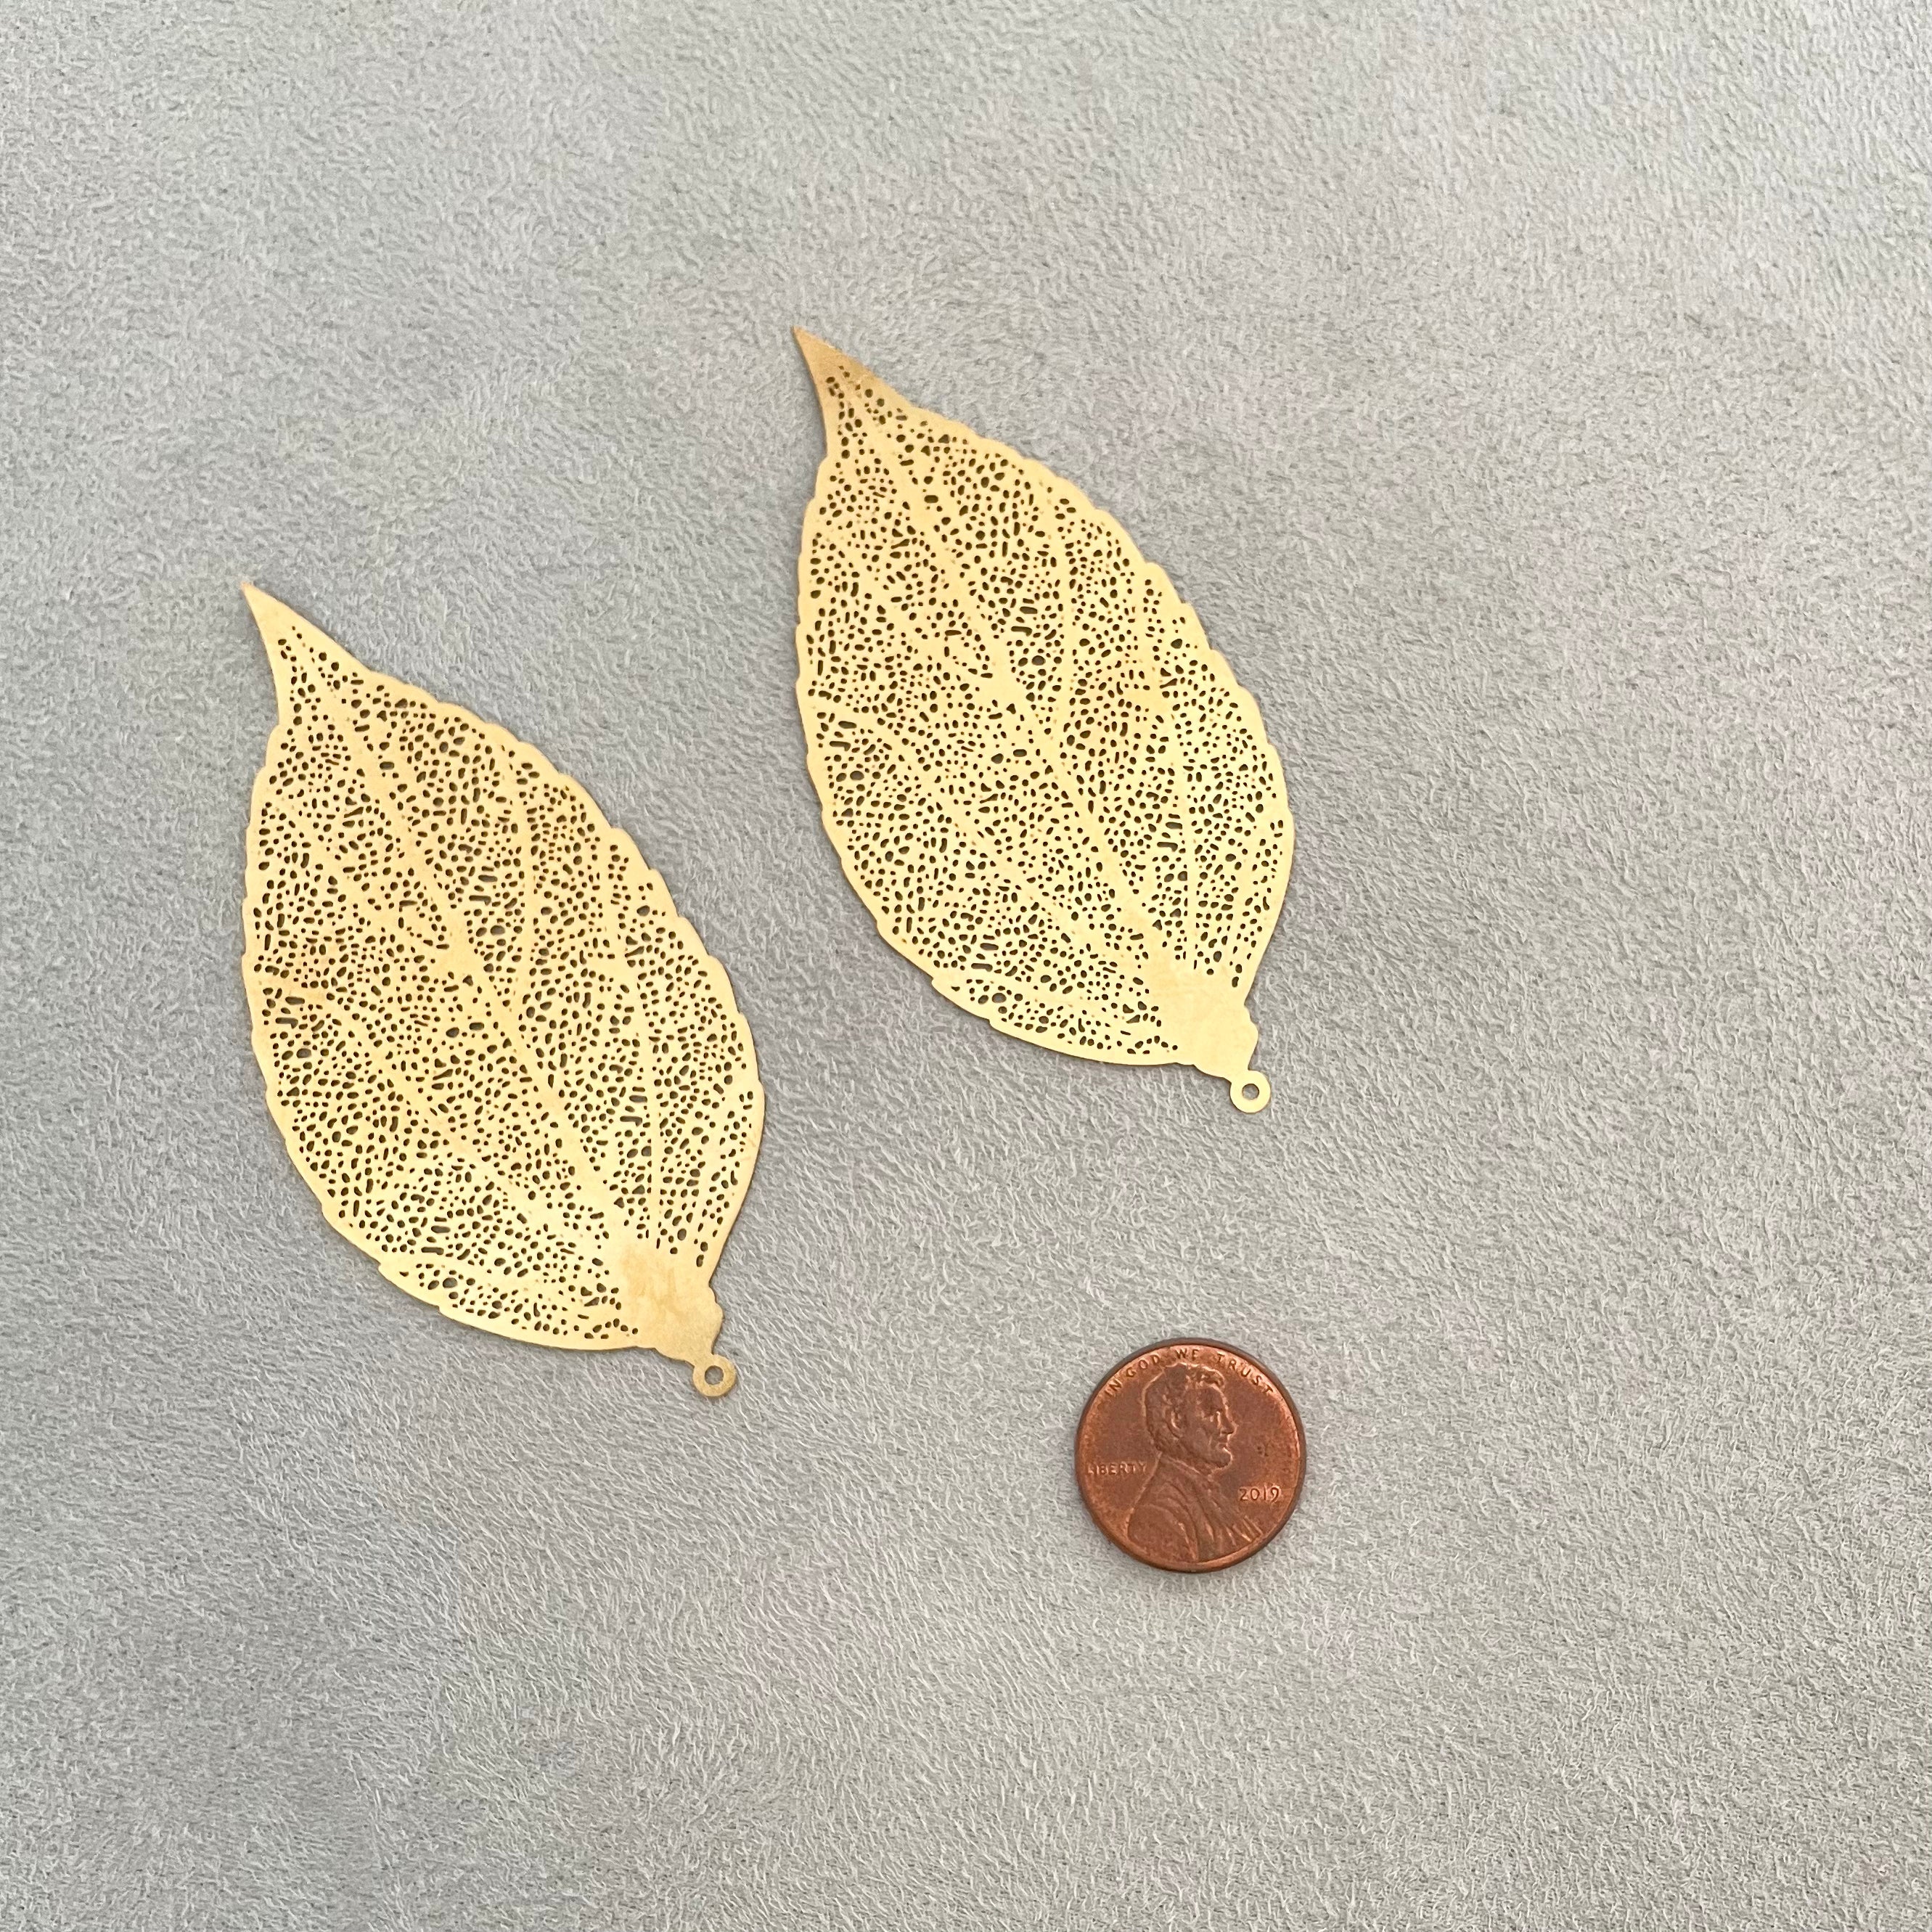 2 gold styling leaves, penny beside for size reference - flat lay props from Champagne & GRIT